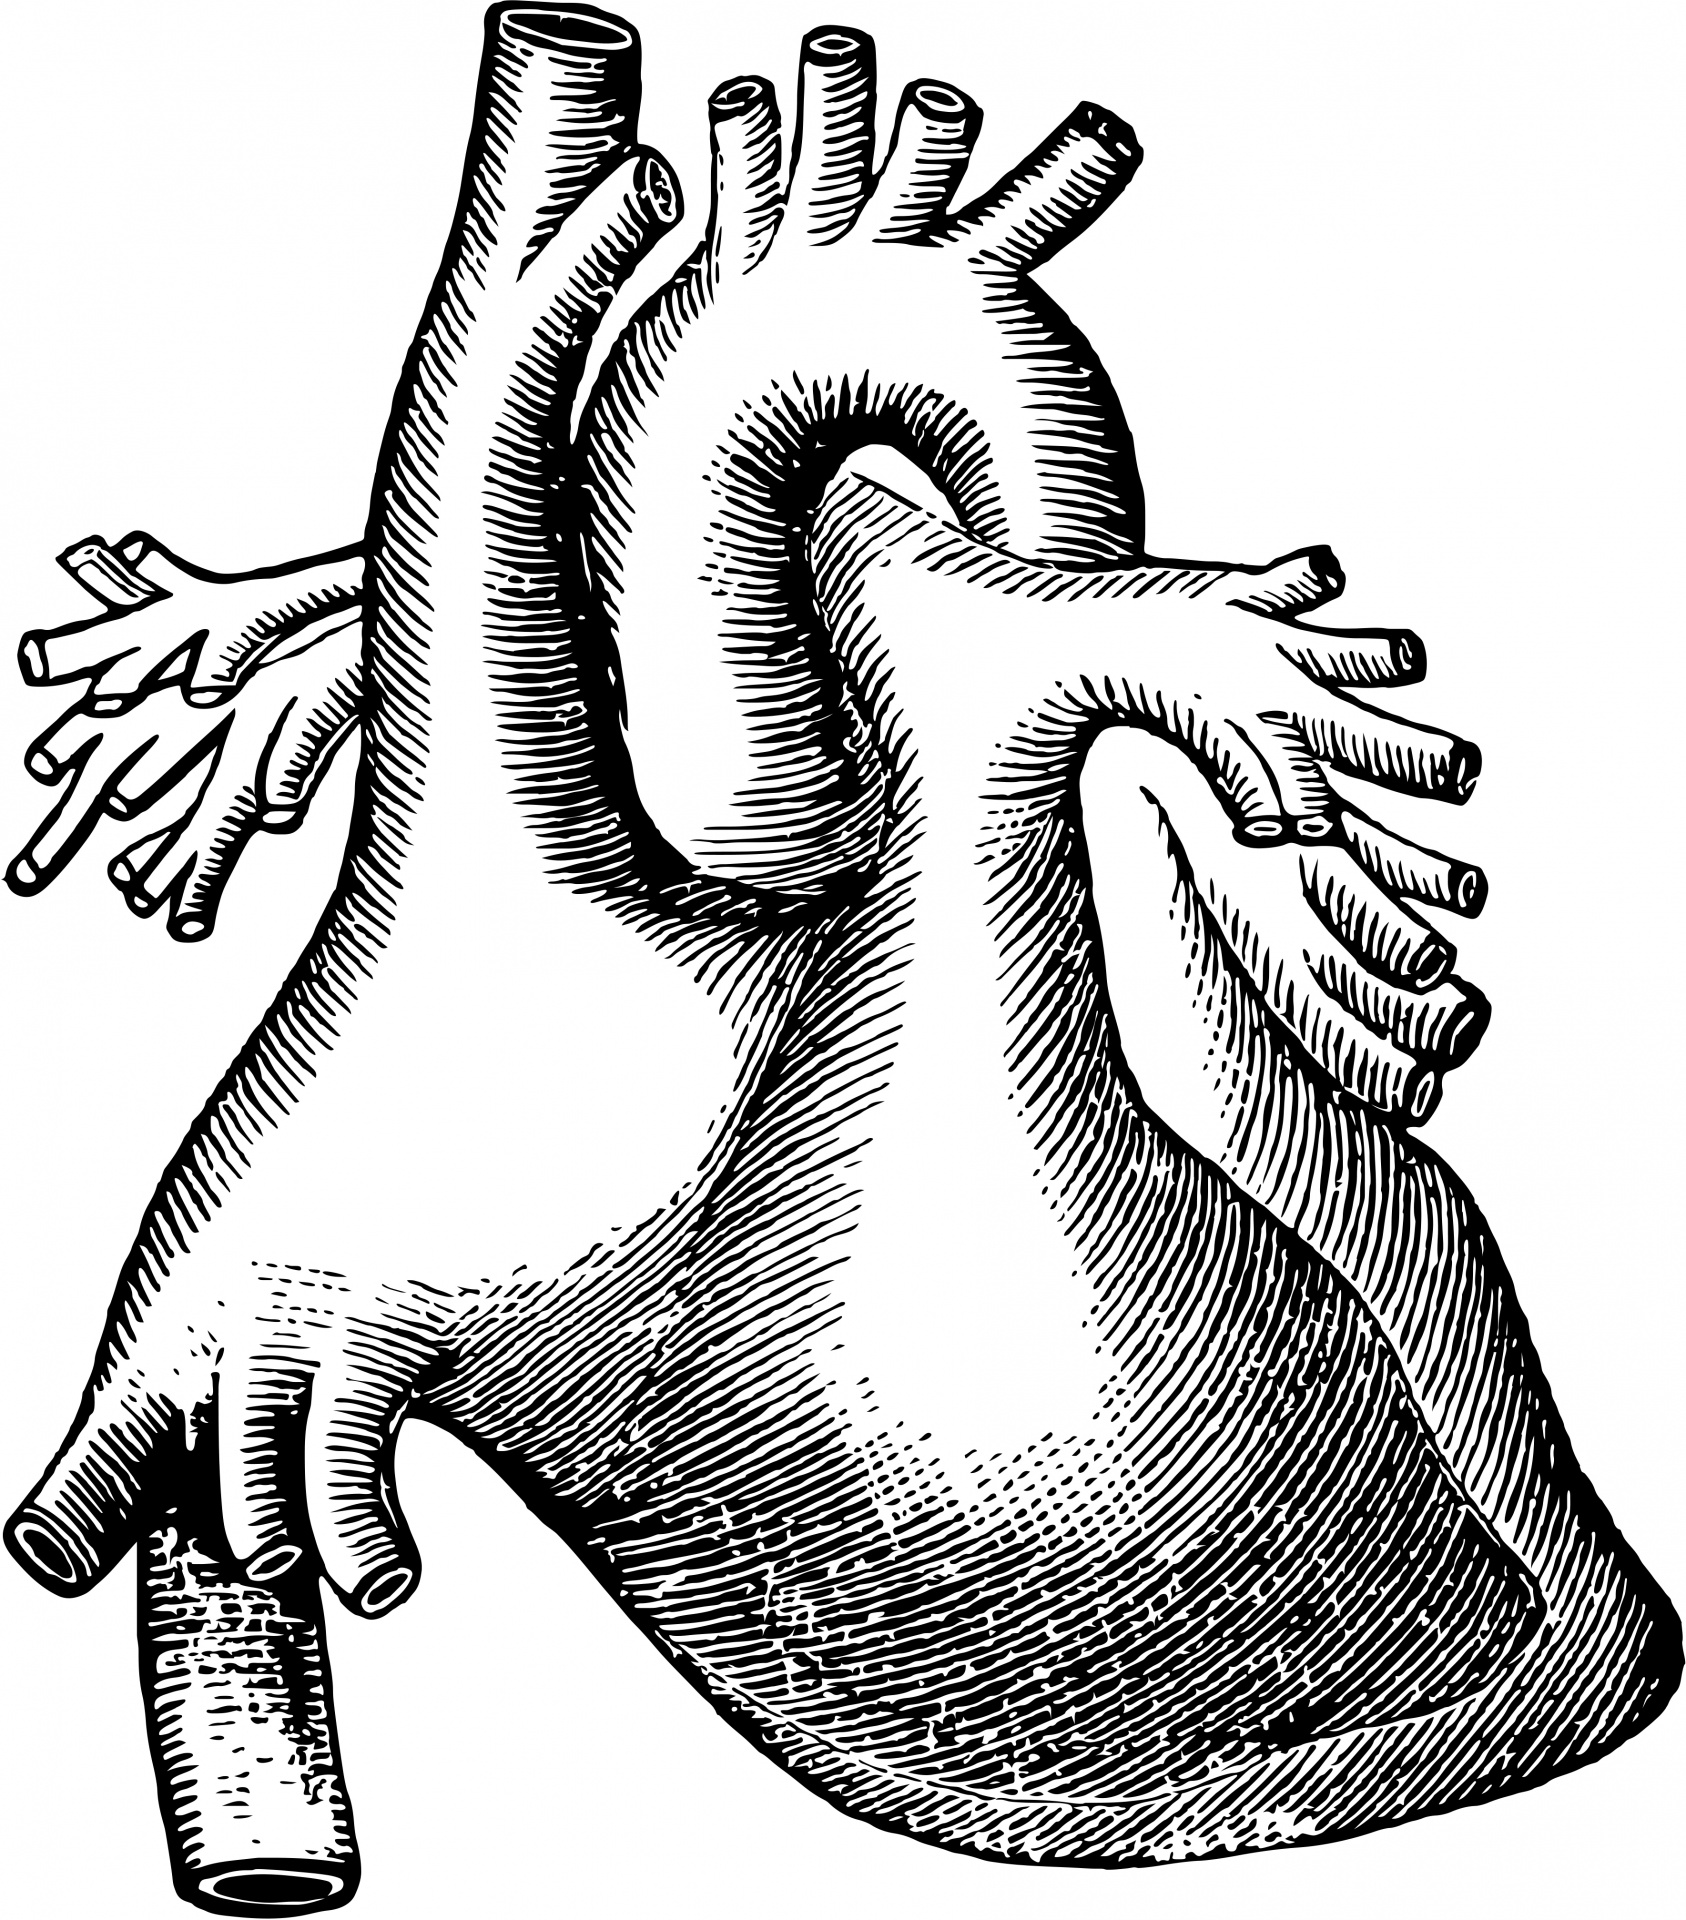 human heart clipart black and white - photo #27